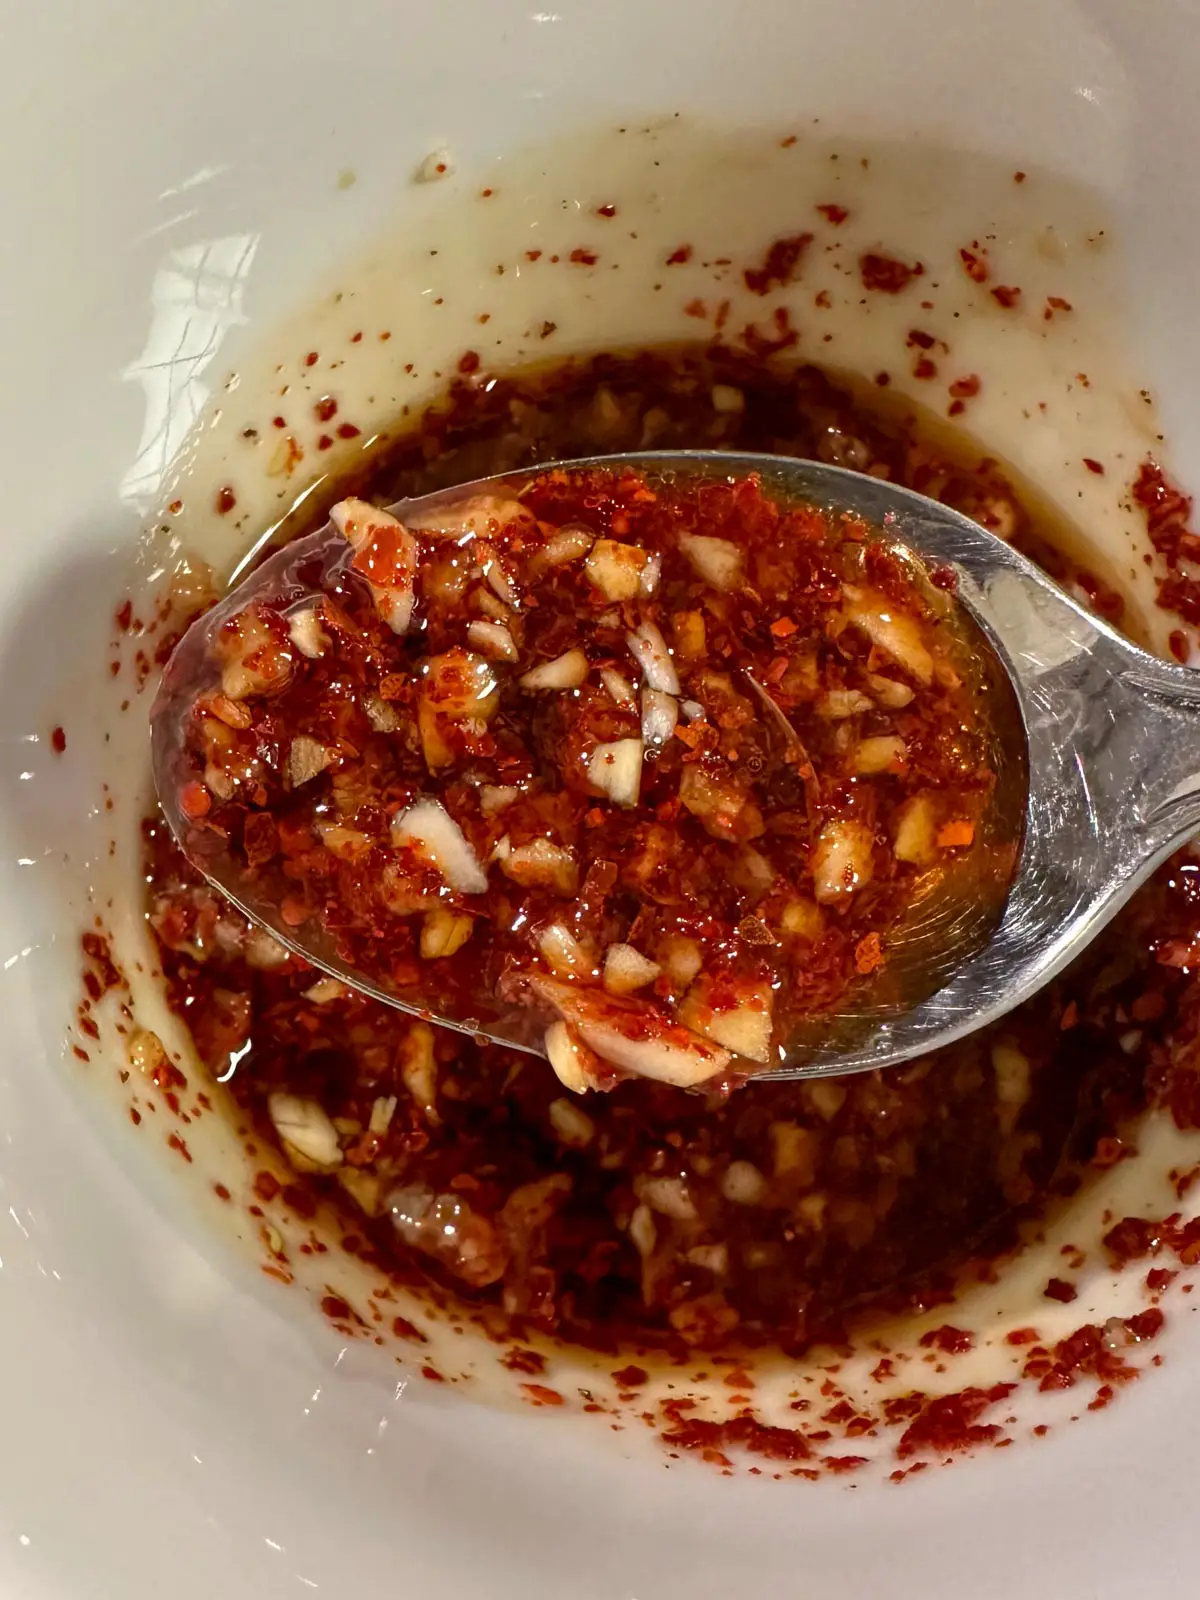 A white bowl containing a spicy sauce with Korean red pepper flakes, and garlic. There is a spoon containing some of the sauce in the foreground.